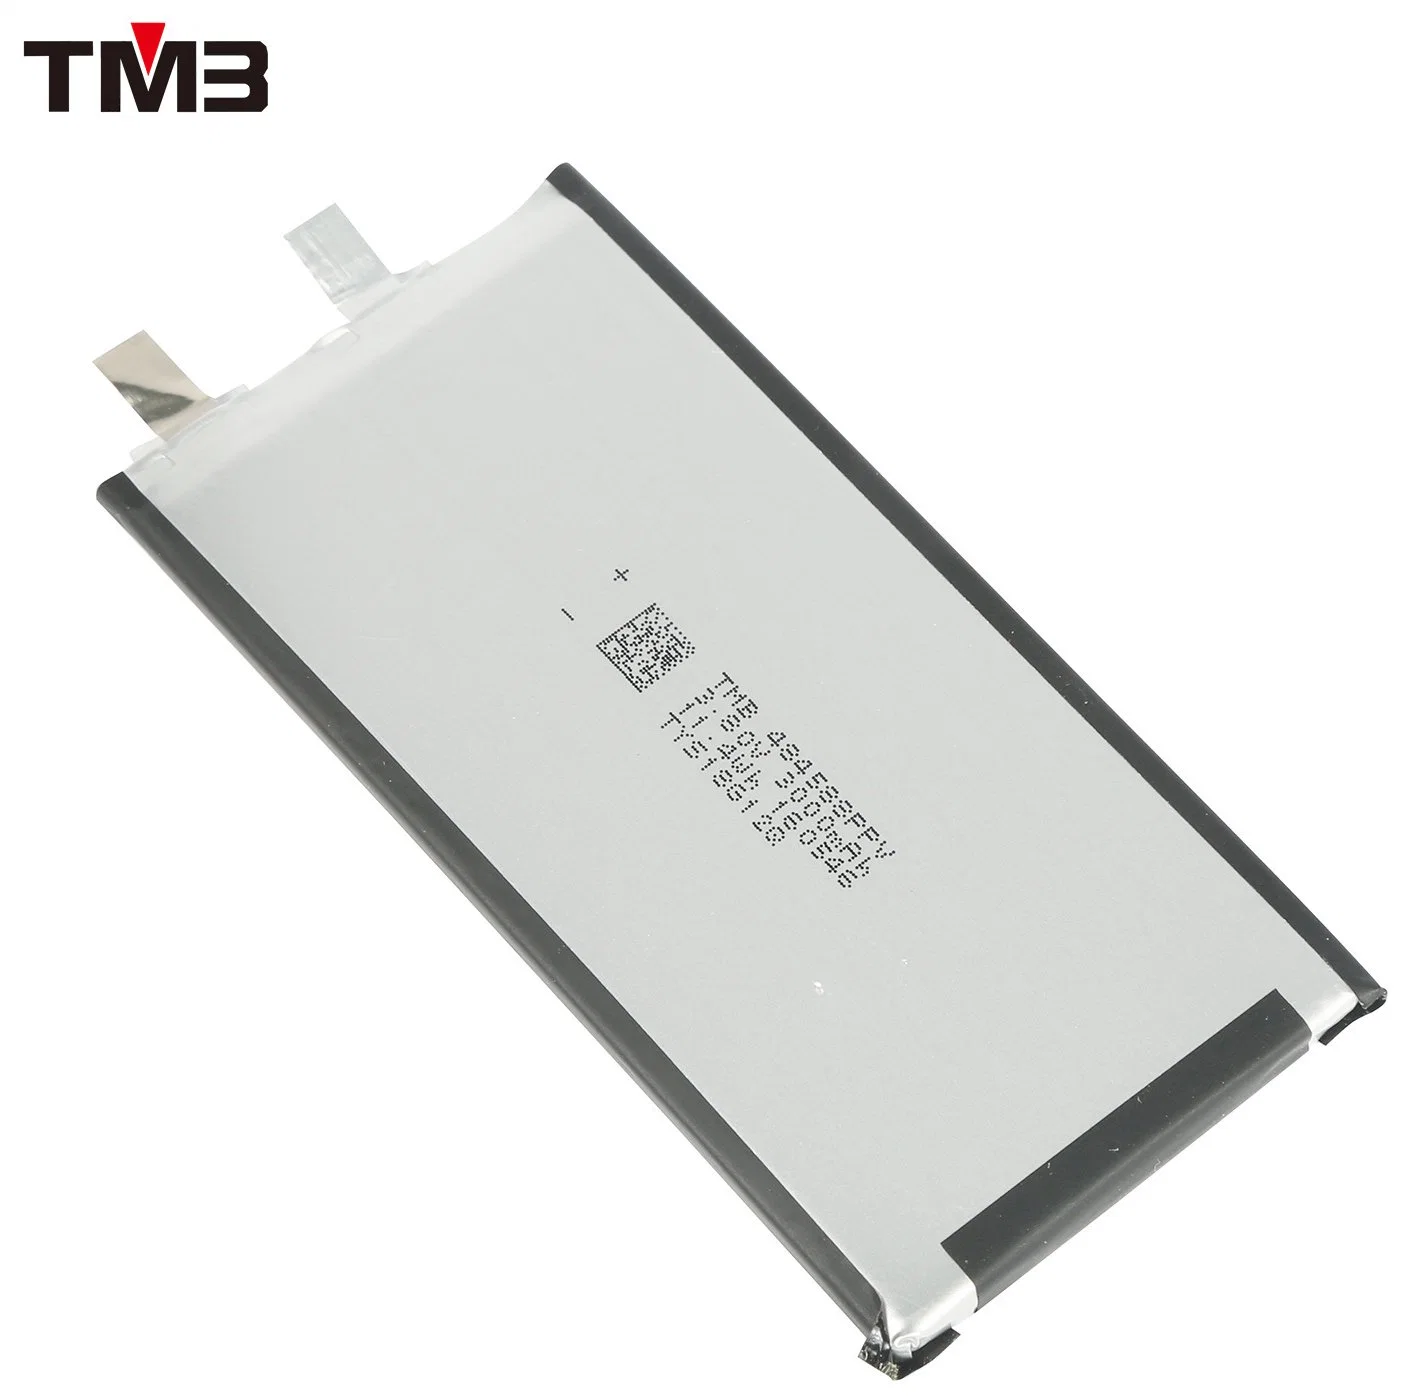 Polymer Li-ion Cell Lithium Ion Battery for Mobile Phone, Digital Camera